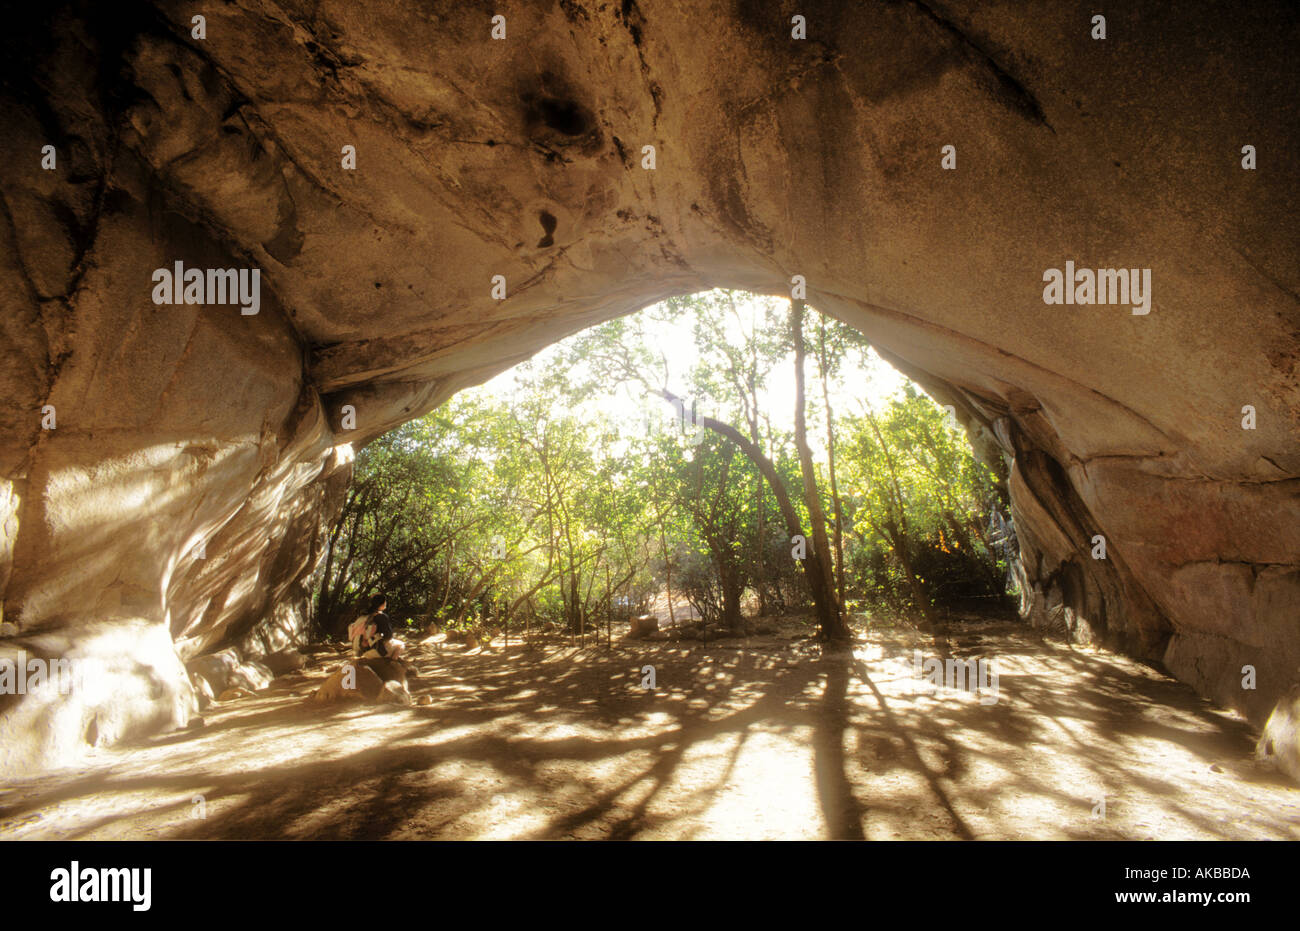 Entrance to Pomongwe Cave Zimbabwe which contains cave paintings with figure in middle distance Stock Photo